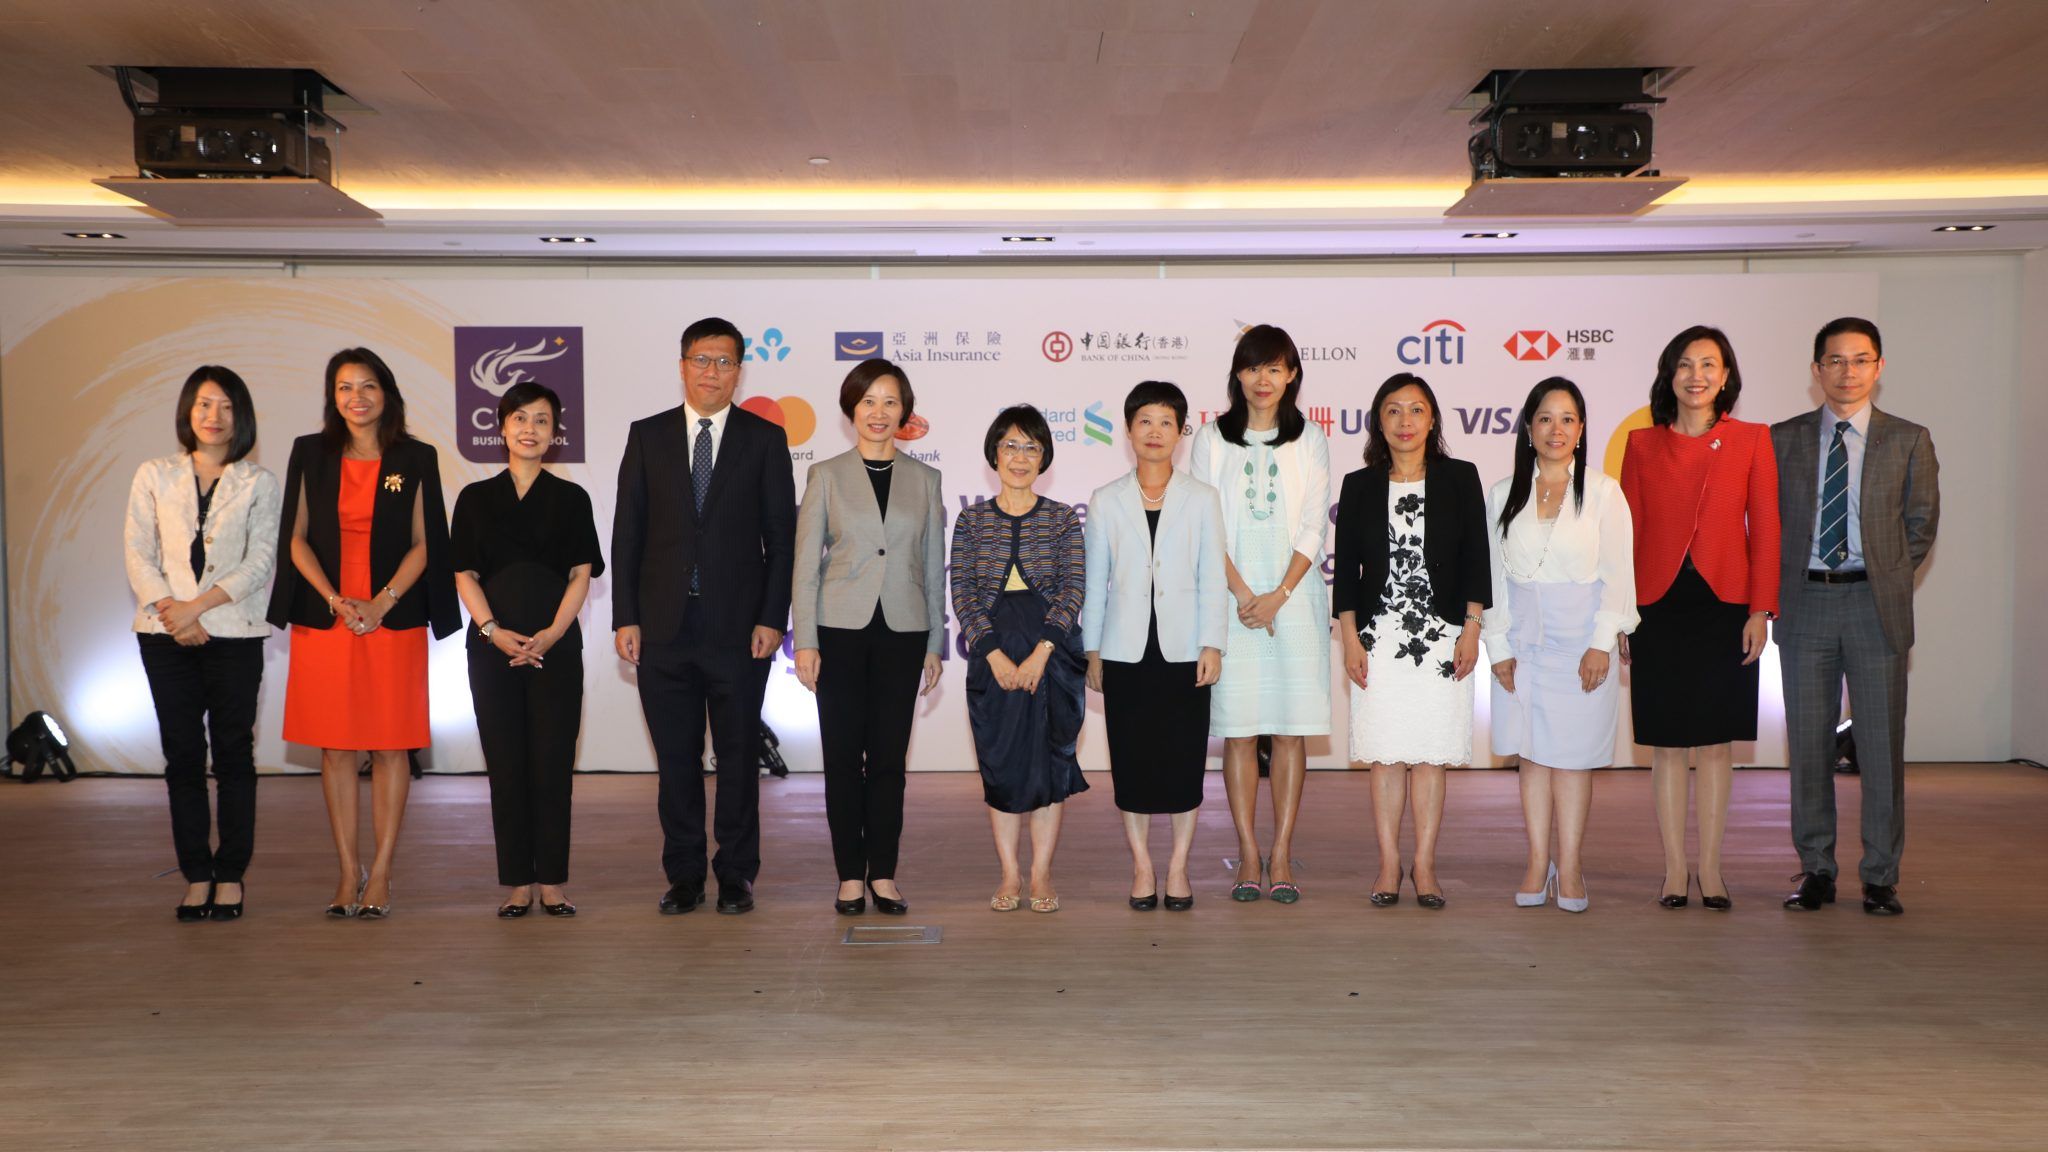 Claire at the launch of CUHK Business School's Dialogue with Women CEOs and Mentorship Programme 2018-19. Here she is pictured with professors and other women leaders, she's second from the left.